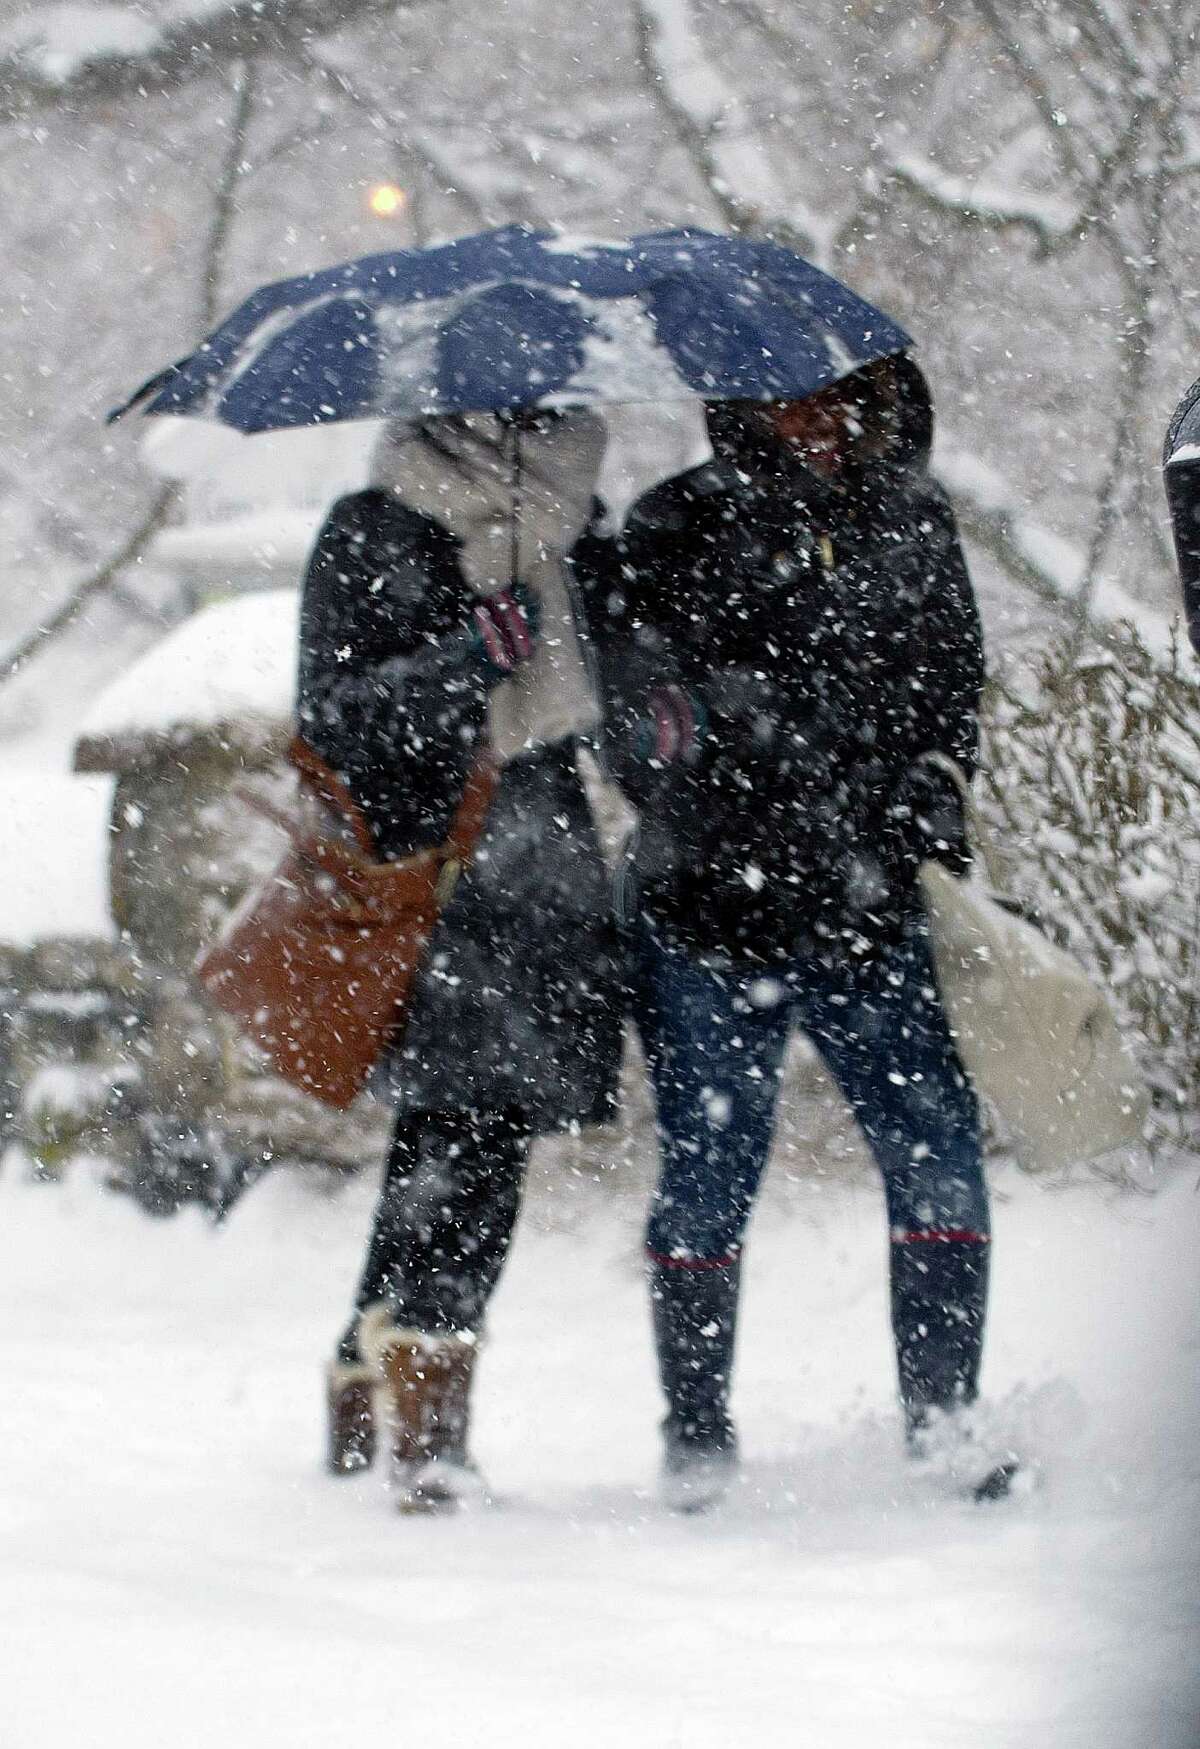 Tyiesha Collins, left, and Ashley Richardson, right, share an umbrella as they walks through the snow in Greenwich, Conn., on Thursday, February 13, 2014. The two were walking to their jobs at Zara, where they said they would call the corporate office to see if they were to be open or closed. The snow made Richardson's commute extra difficult because she came into Greenwich from Bridgeport. "For me it's a super super pain to get here and then they're like, 'Okay, you're closed, you can go home,'" she said.